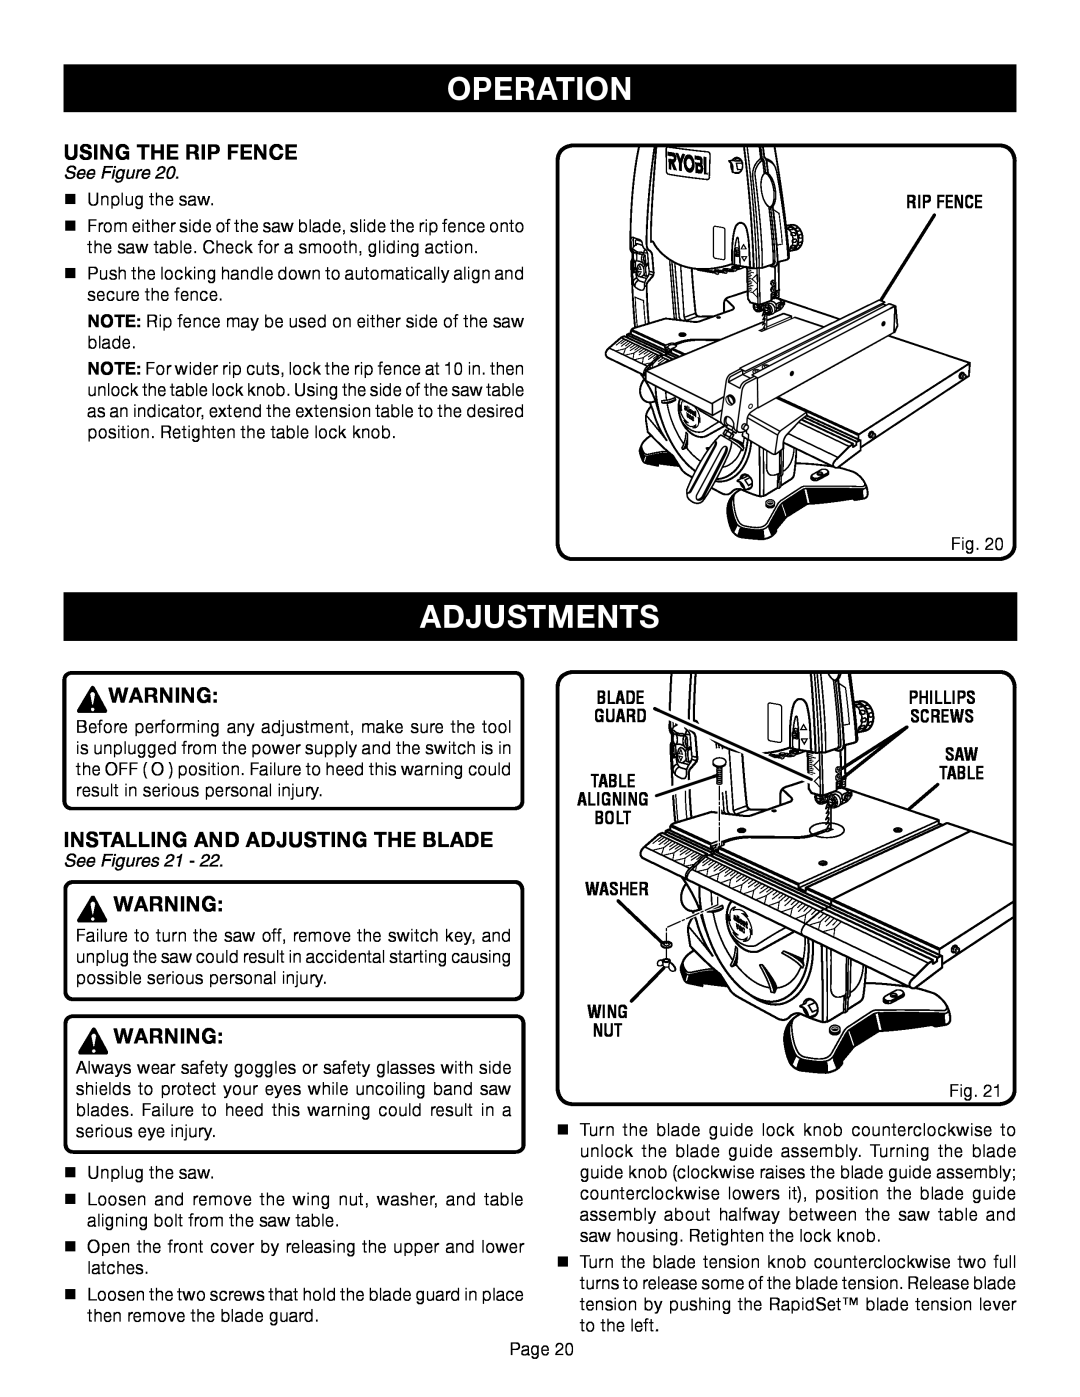 Ryobi BS1001SV manual Adjustments, Operation, Rip Fence, See Figures 21, Blade, Guard, Bolt, Wing Nut 